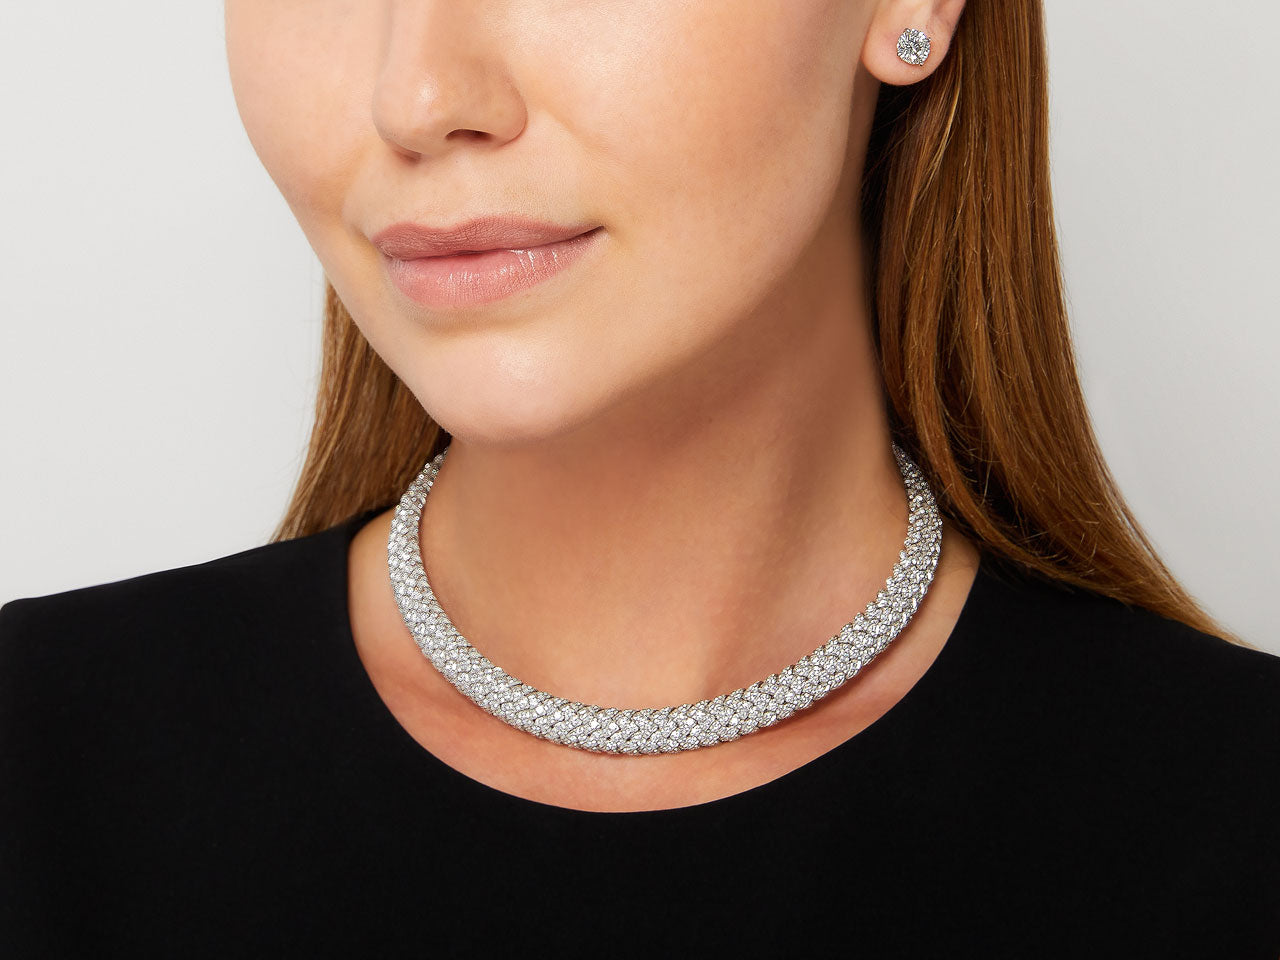 Tiffany & Co. 'Vannerie' Diamond Necklace in Platinum